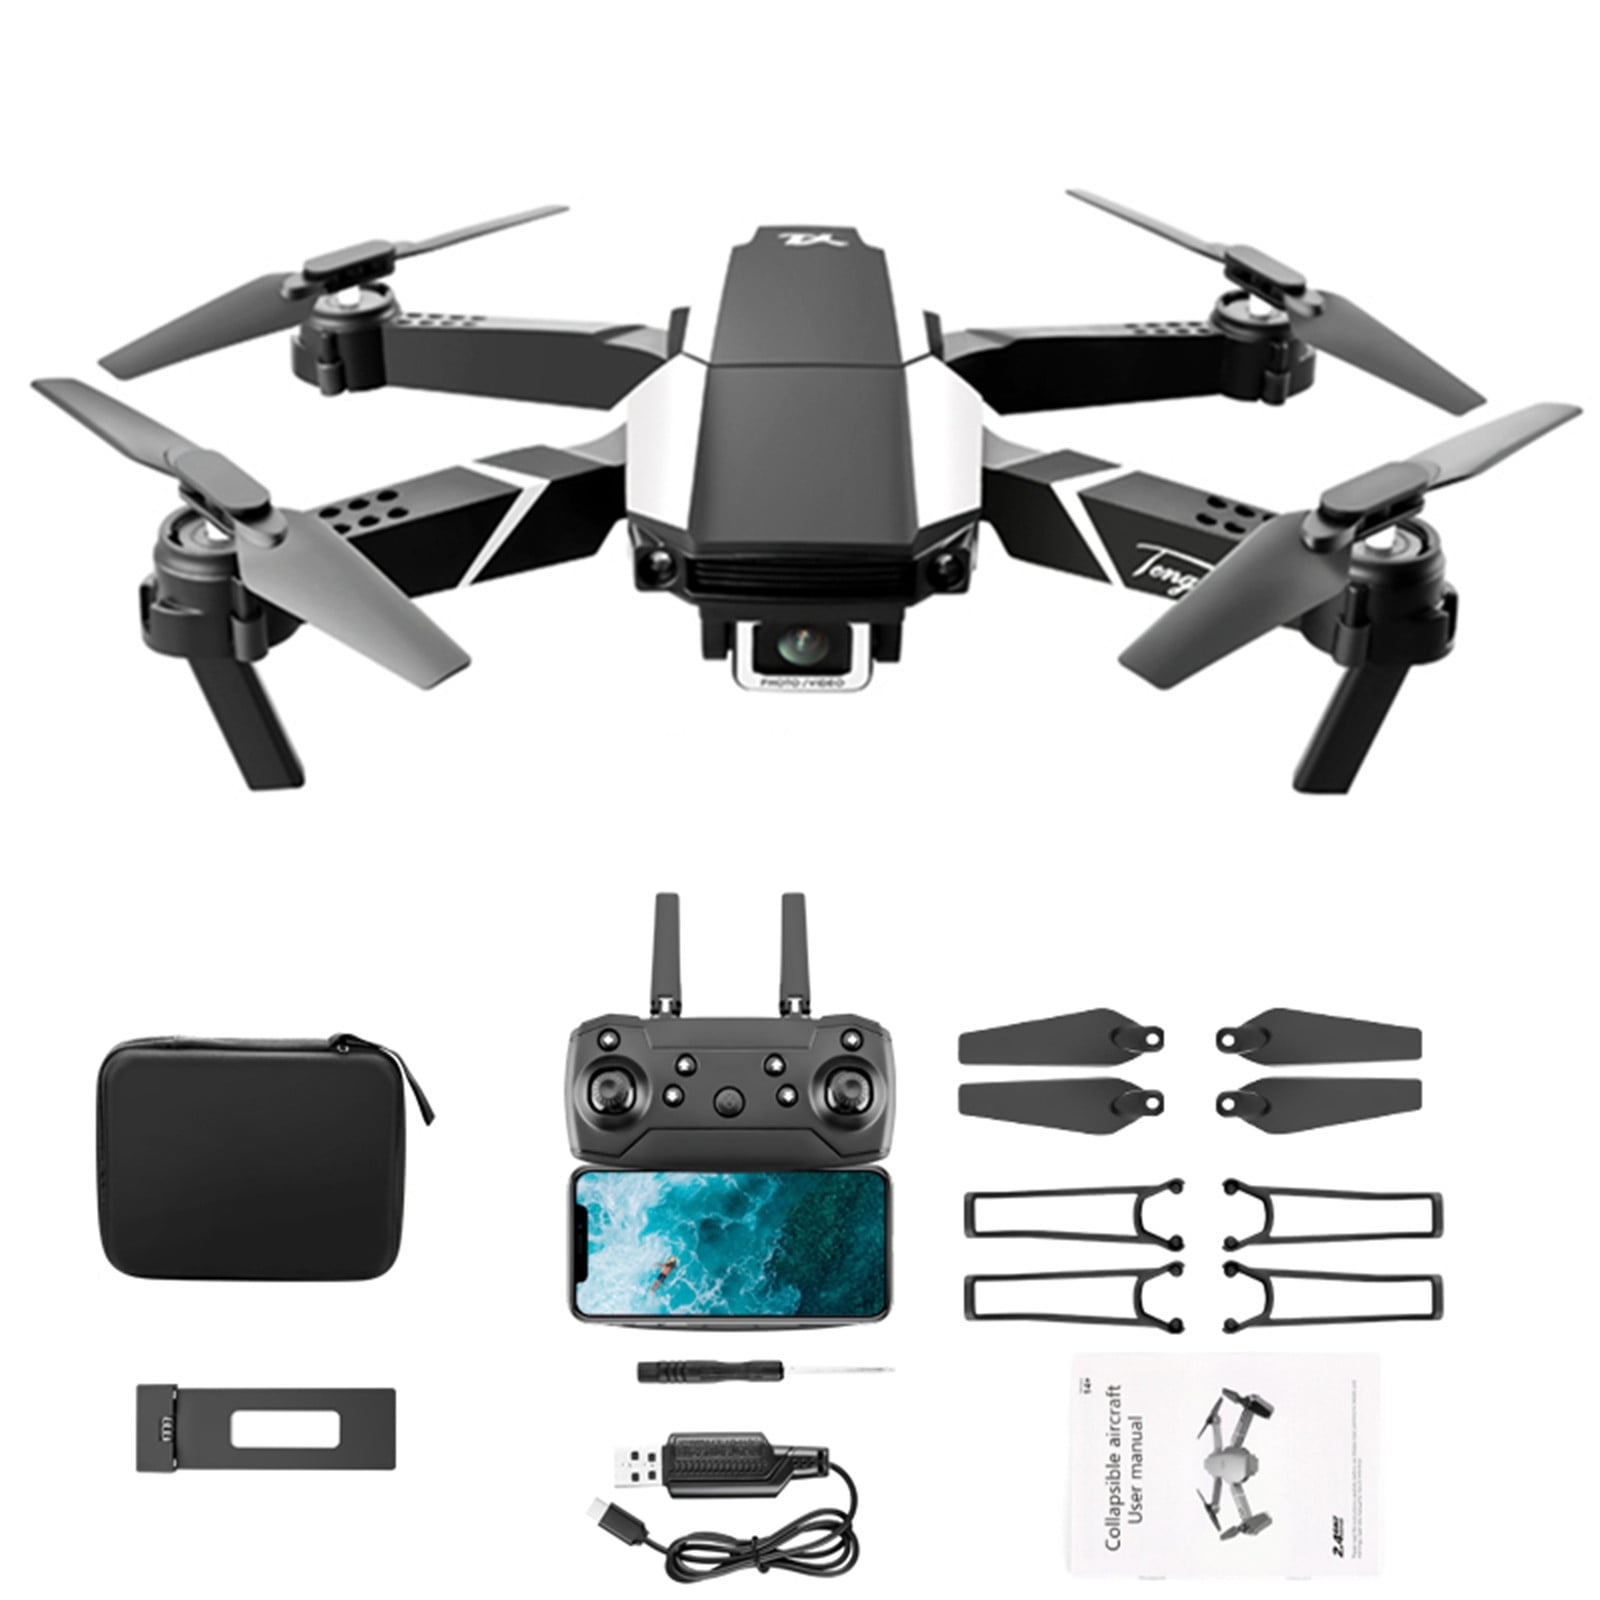 sorg nevø Triumferende Flash Picks Sale! CWCWFHZH Drone with Camera for Adults Kids, Drone With  Daul 4K HD FPV Camera Remote Control Toys Gifts For Boys Girls With  Altitude Hold Headless Mode One Key Start